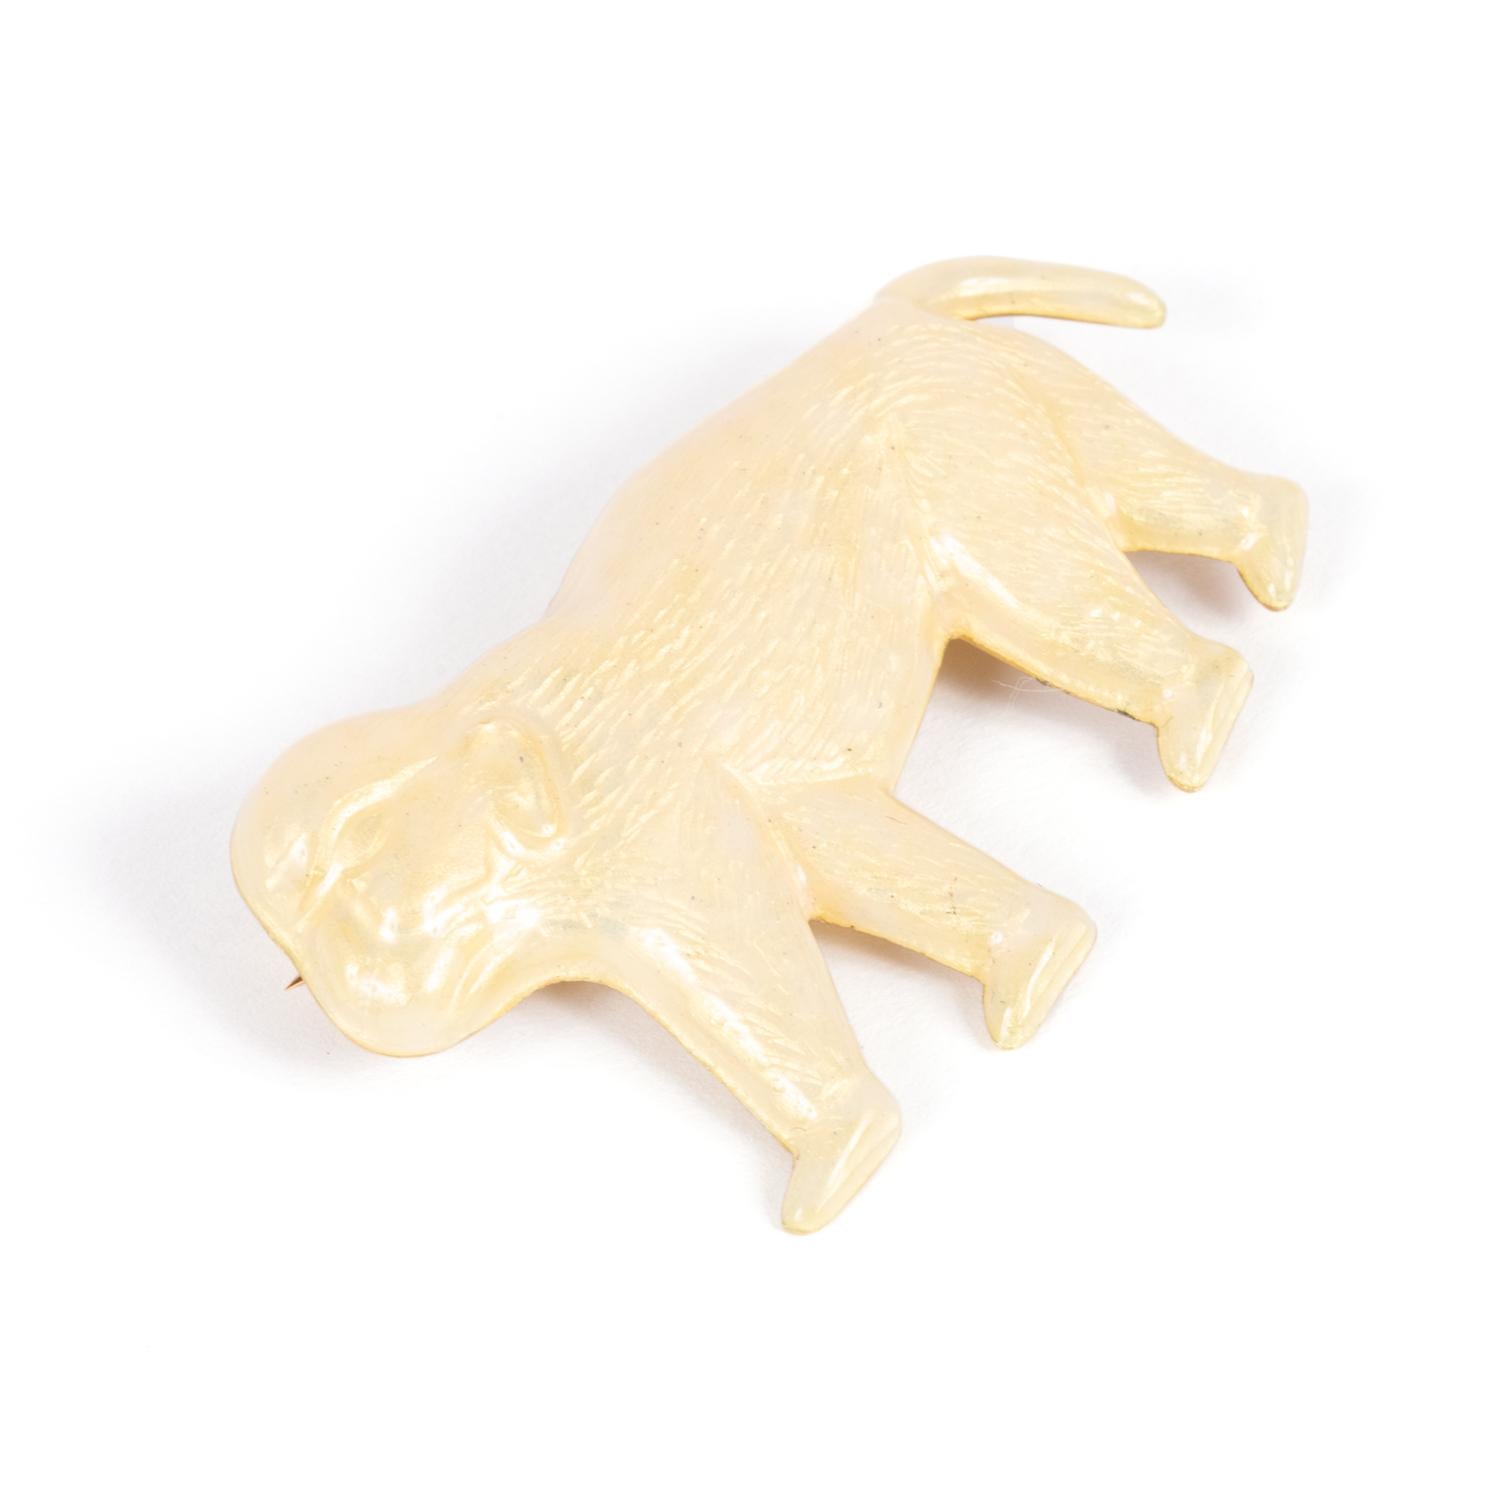 Beautiful Giancarlo Montebello.  18 K Gold white enameled monkey brooch, perfect for everyday wear.
